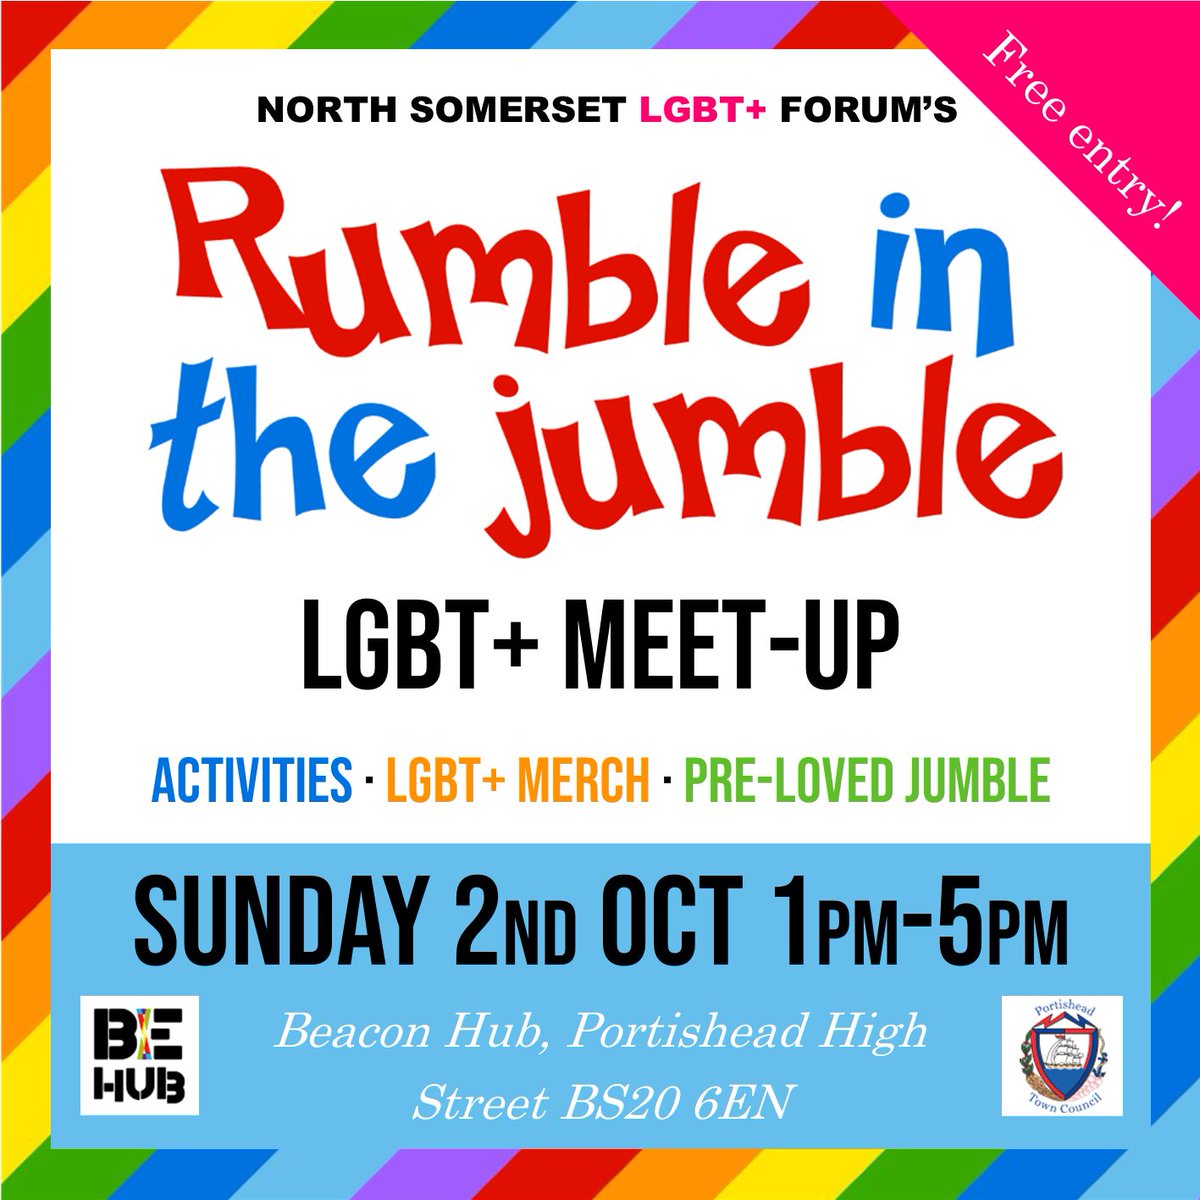 We are thrilled to be holding an LGBT+ meet-up event in the Beacon Hub, Portishead Methodist Church, Sun 2nd Oct 1-5pm. Join us to take part in activities, browse pre-loved jumble, or just chill out in a safe space! FAO @TTTPortishead @PortisheadTownC @PortisheadBloom